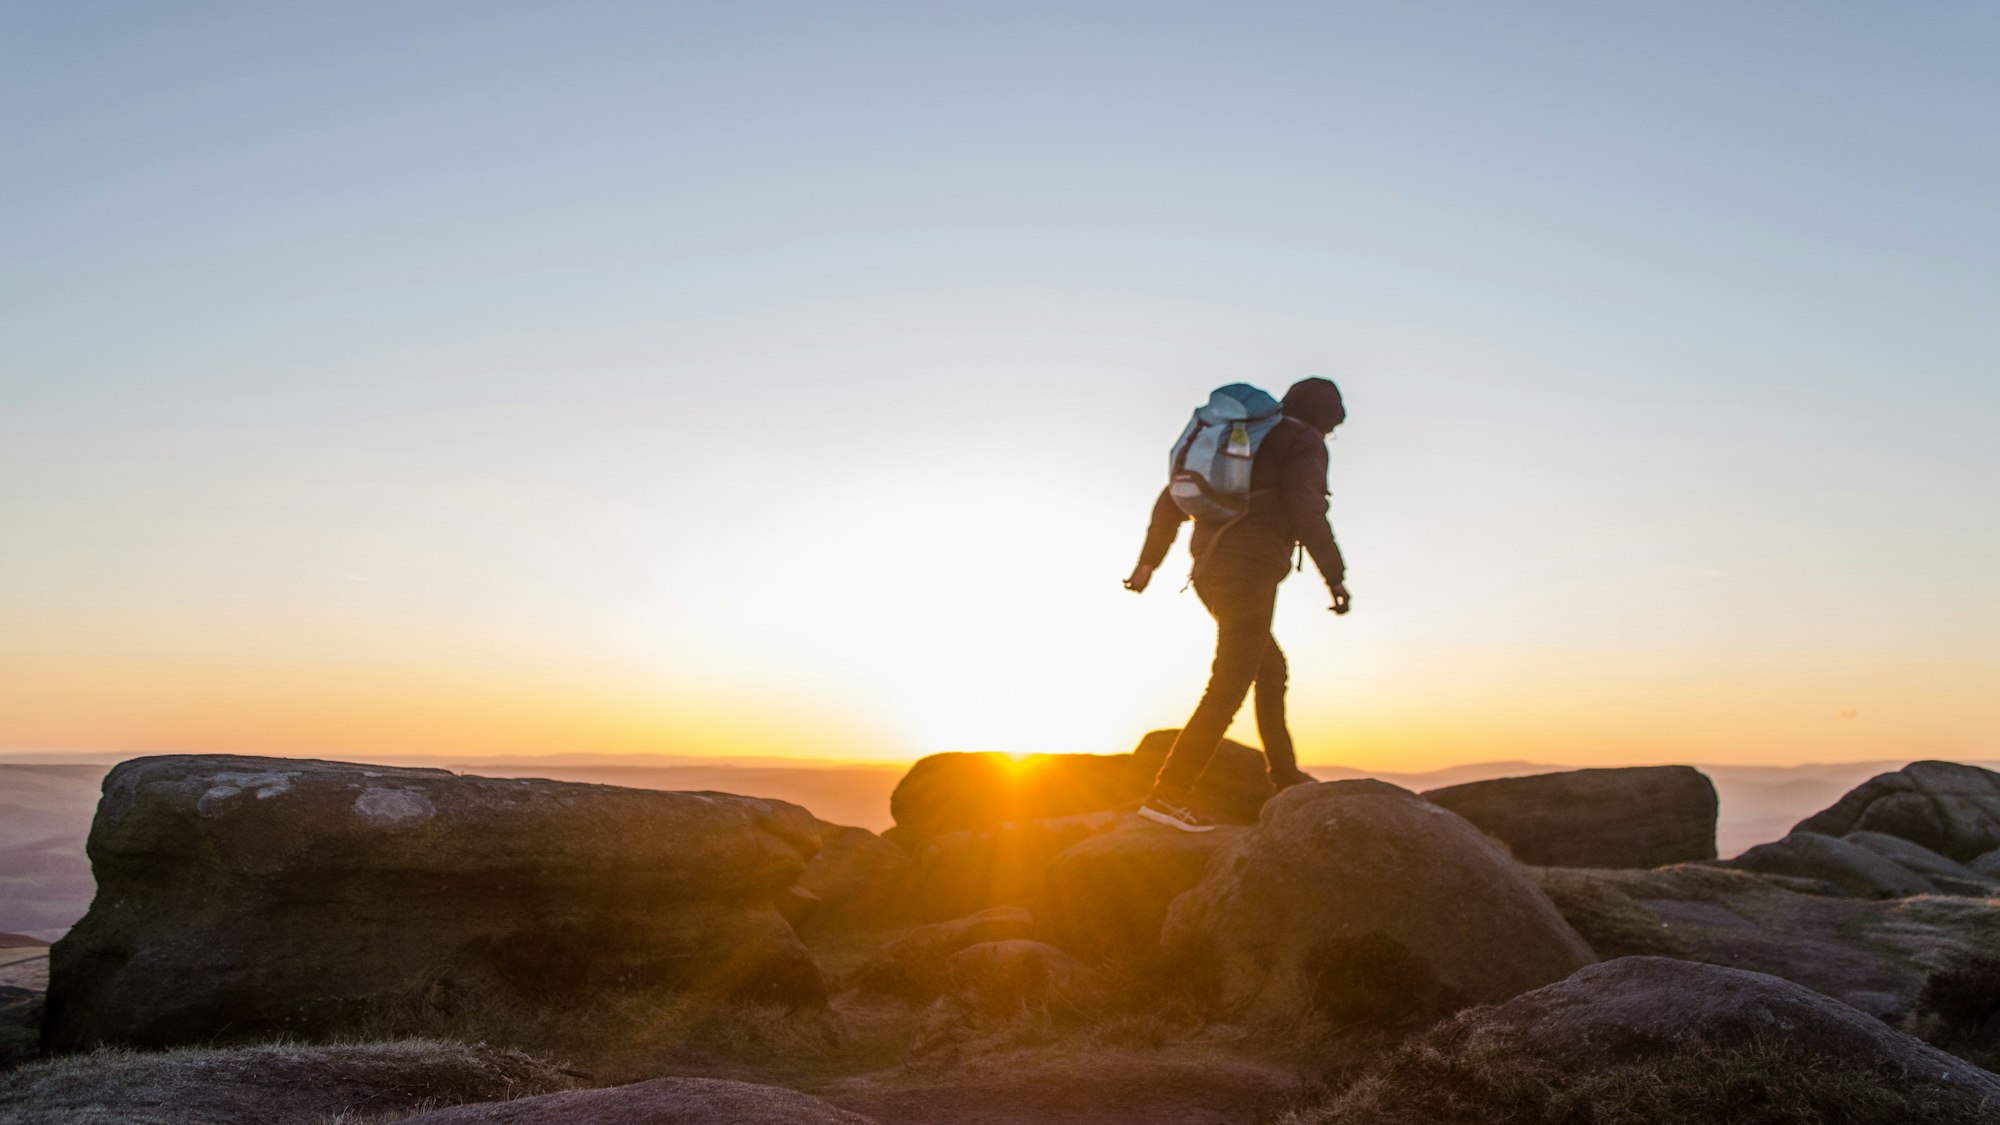 Clear sunny days are few and far apart during the winters, it was nice to have a weekend of clear skies and  an amazing sunset atop Stanage Edge, near Hathersage in the Peak District.